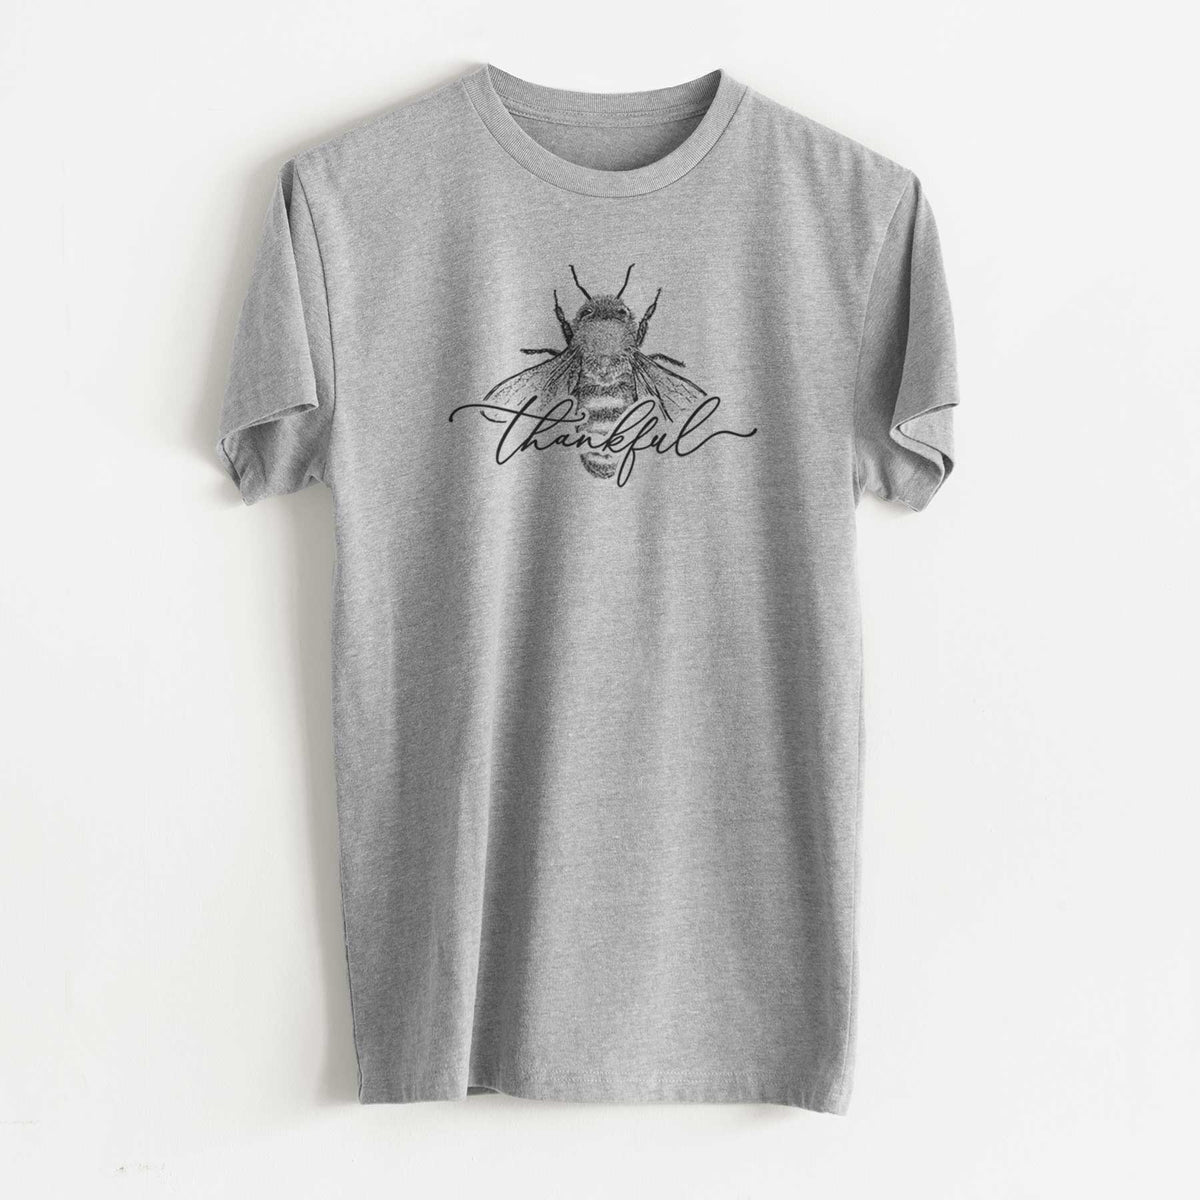 Bee Thankful - Unisex Recycled Eco Tee  - CLOSEOUT - FINAL SALE